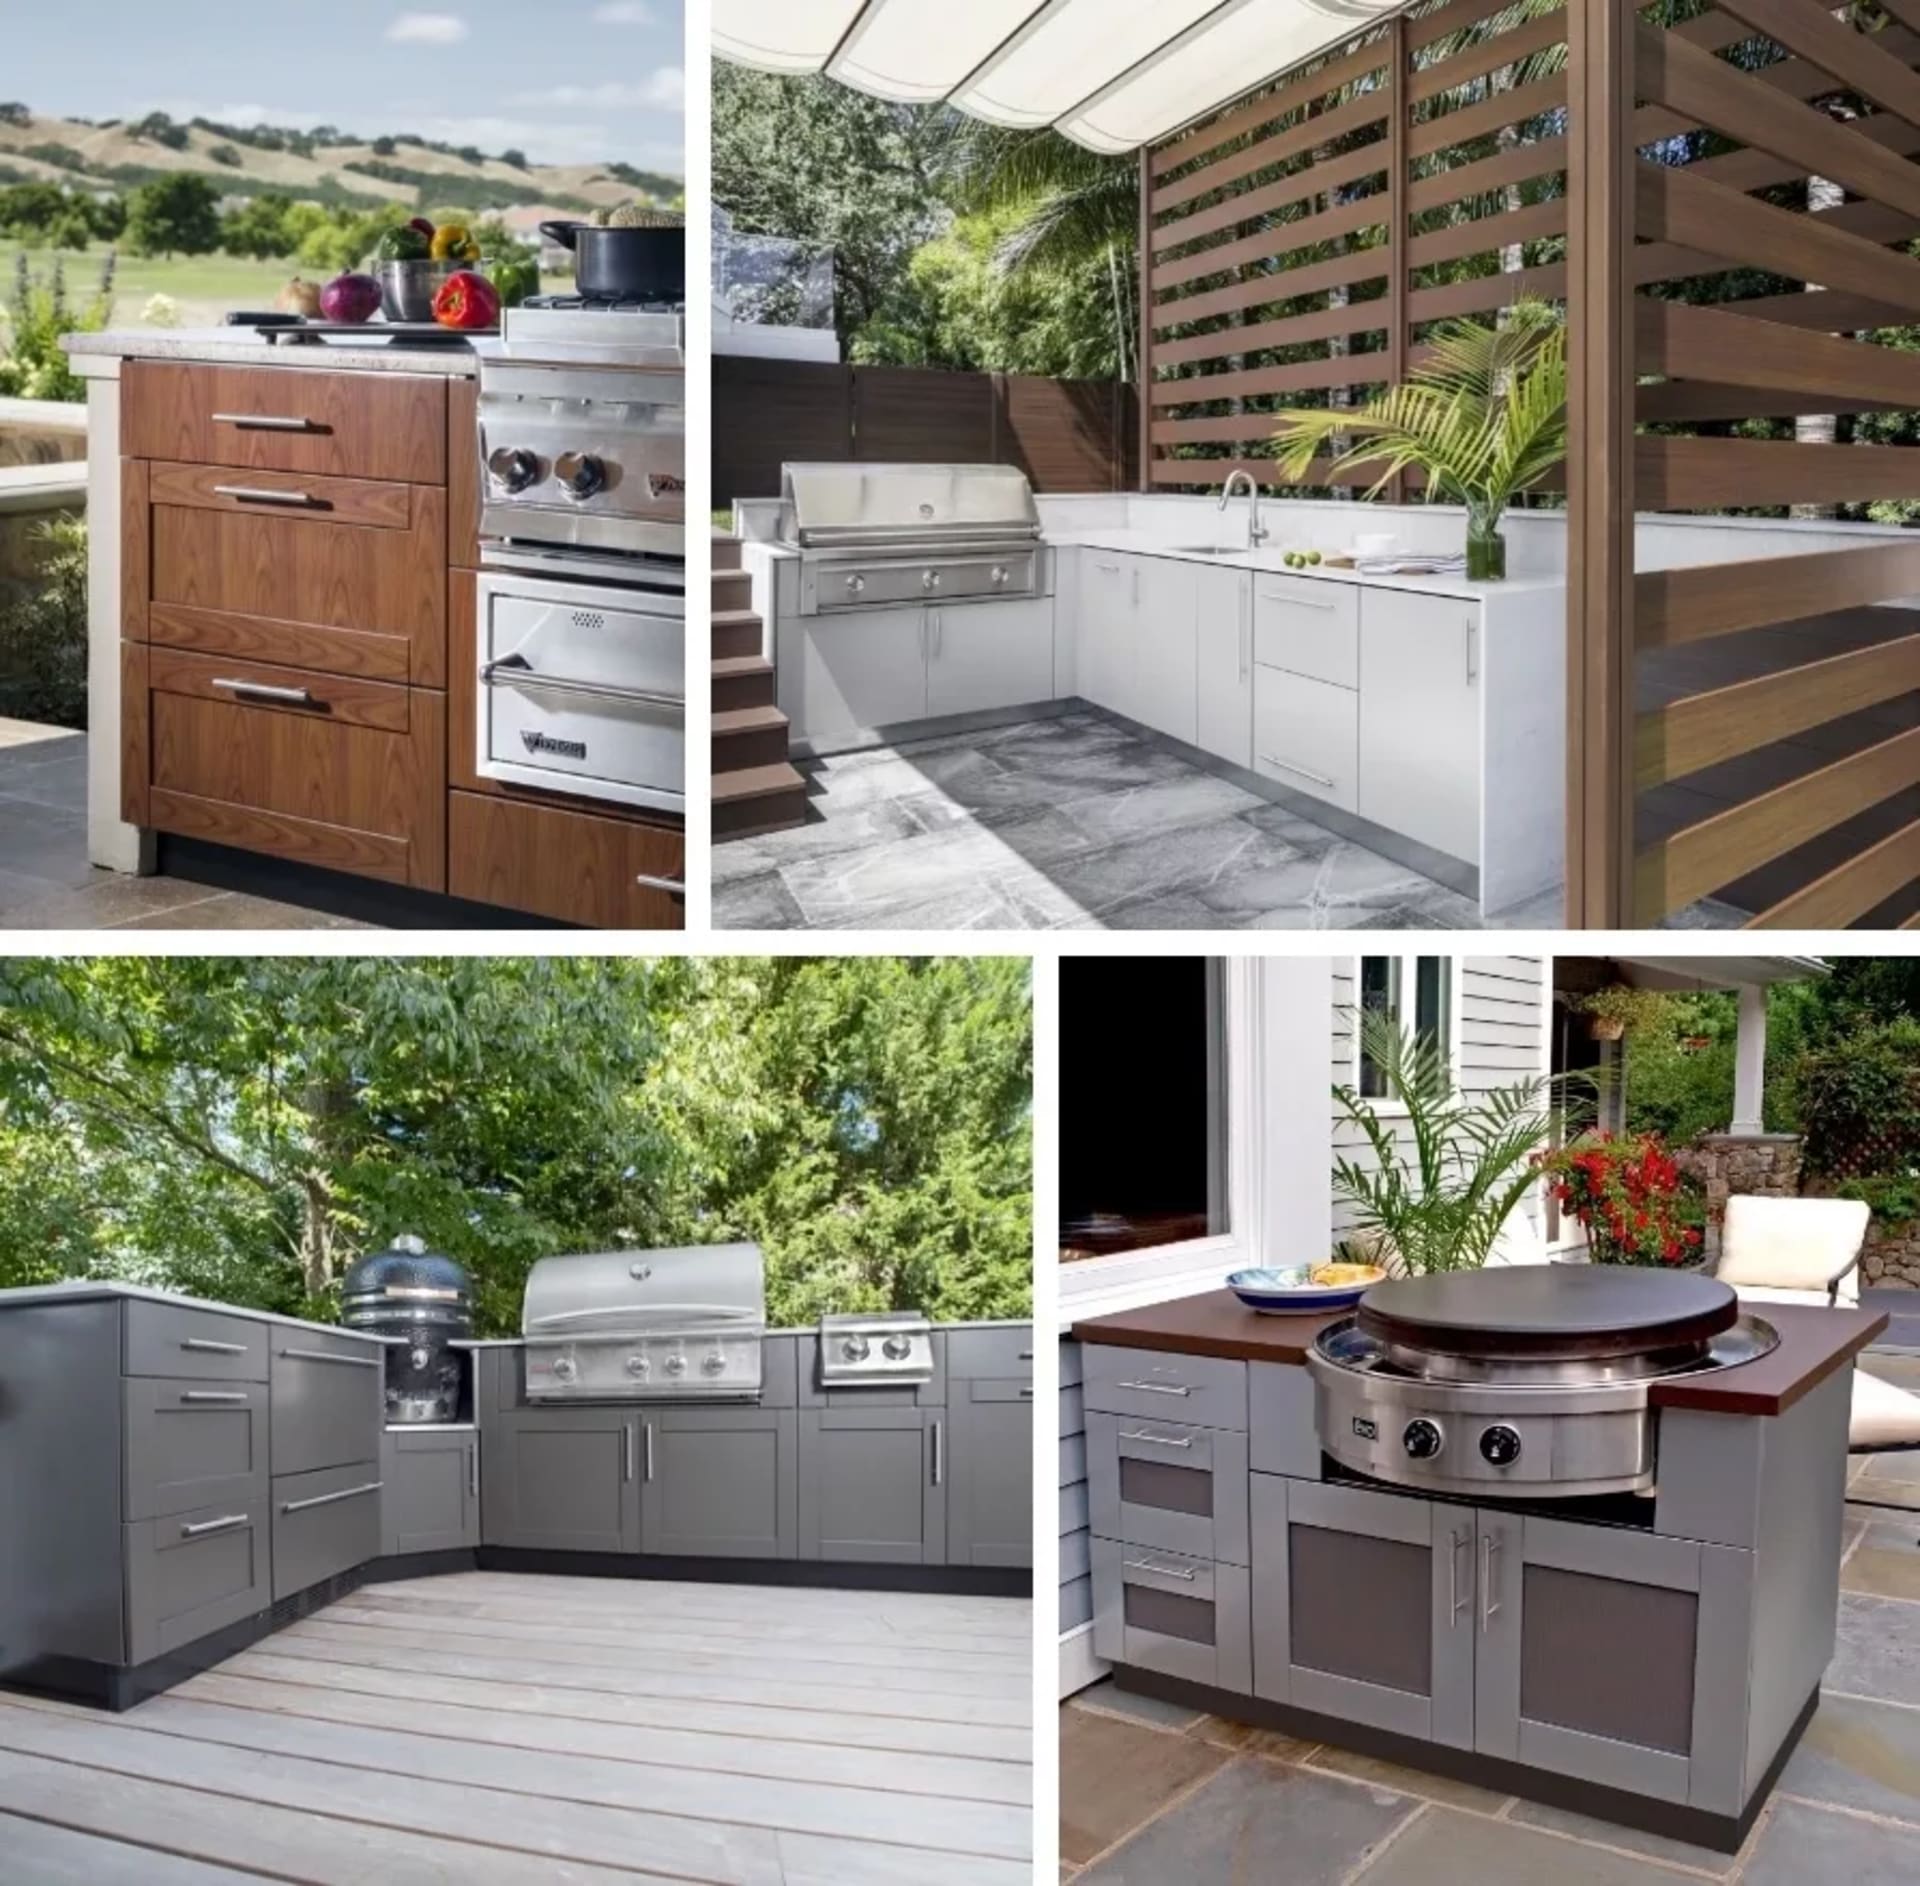 About Danver outdoor kitchens